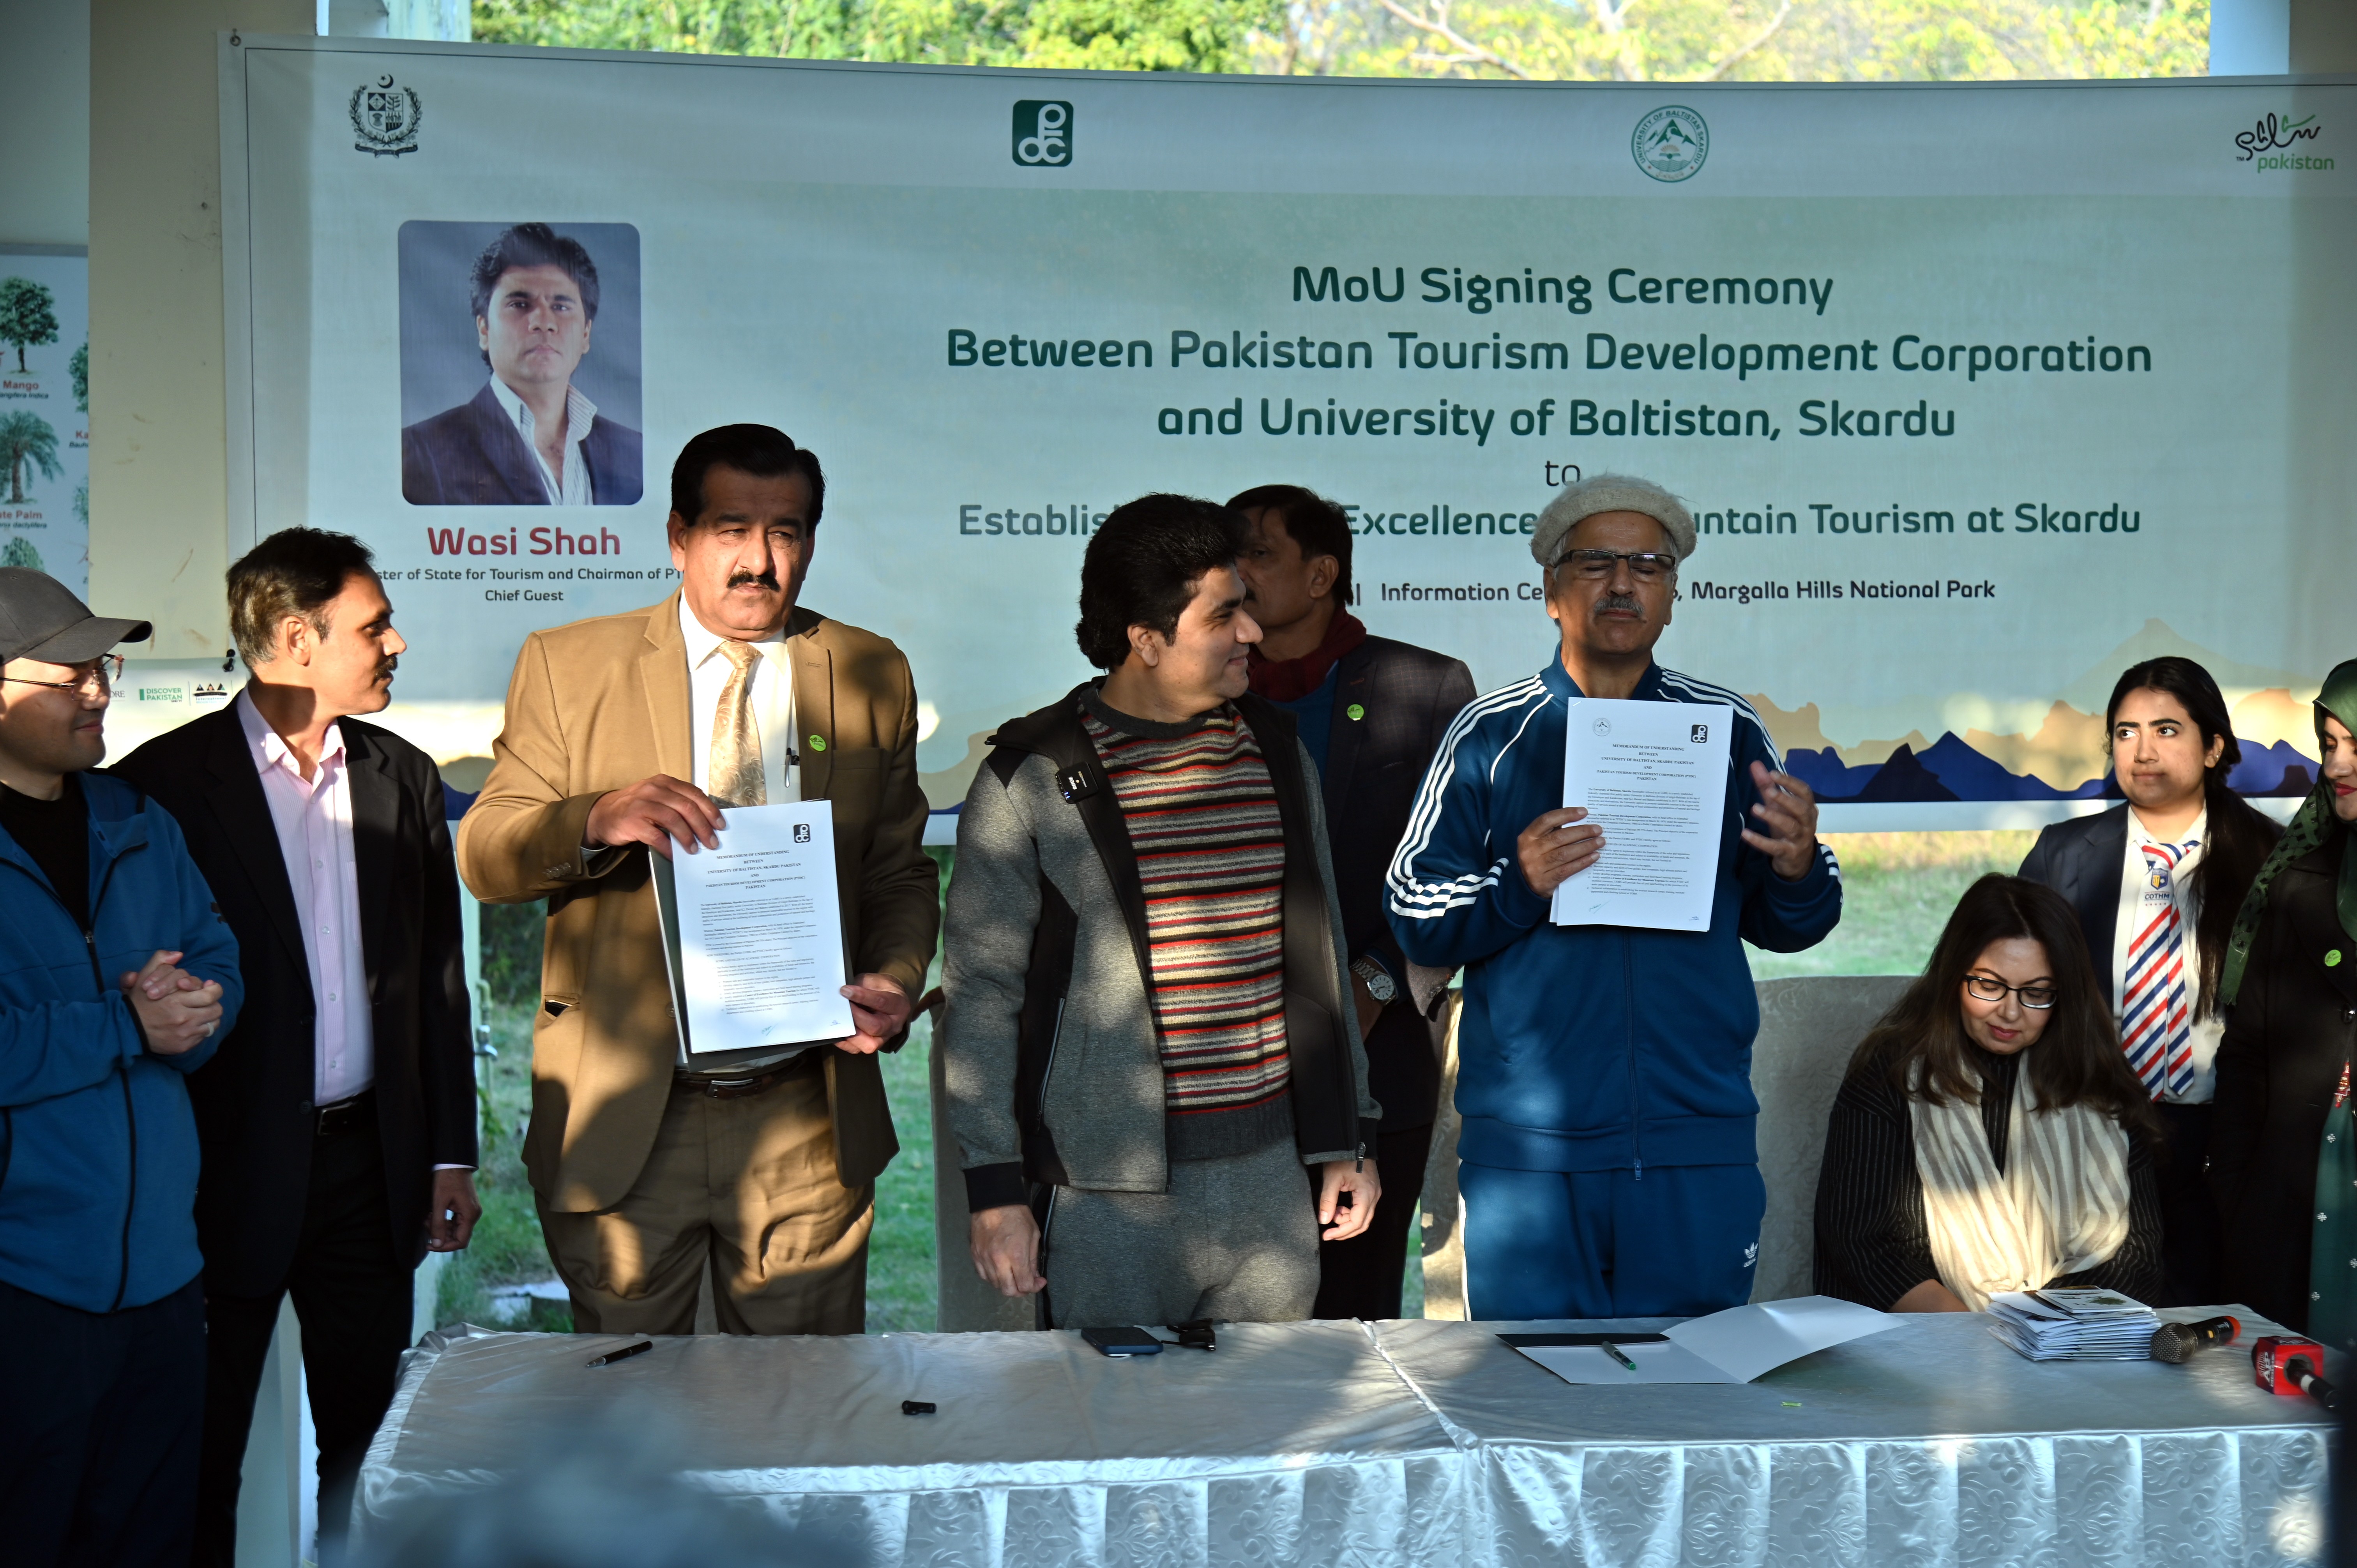 MoU signing Ceremony between Pakistan Tourism Development Corporation and the University of Baltistan, Skardu to establish a center of Excellence for mountain tourism at Skardu